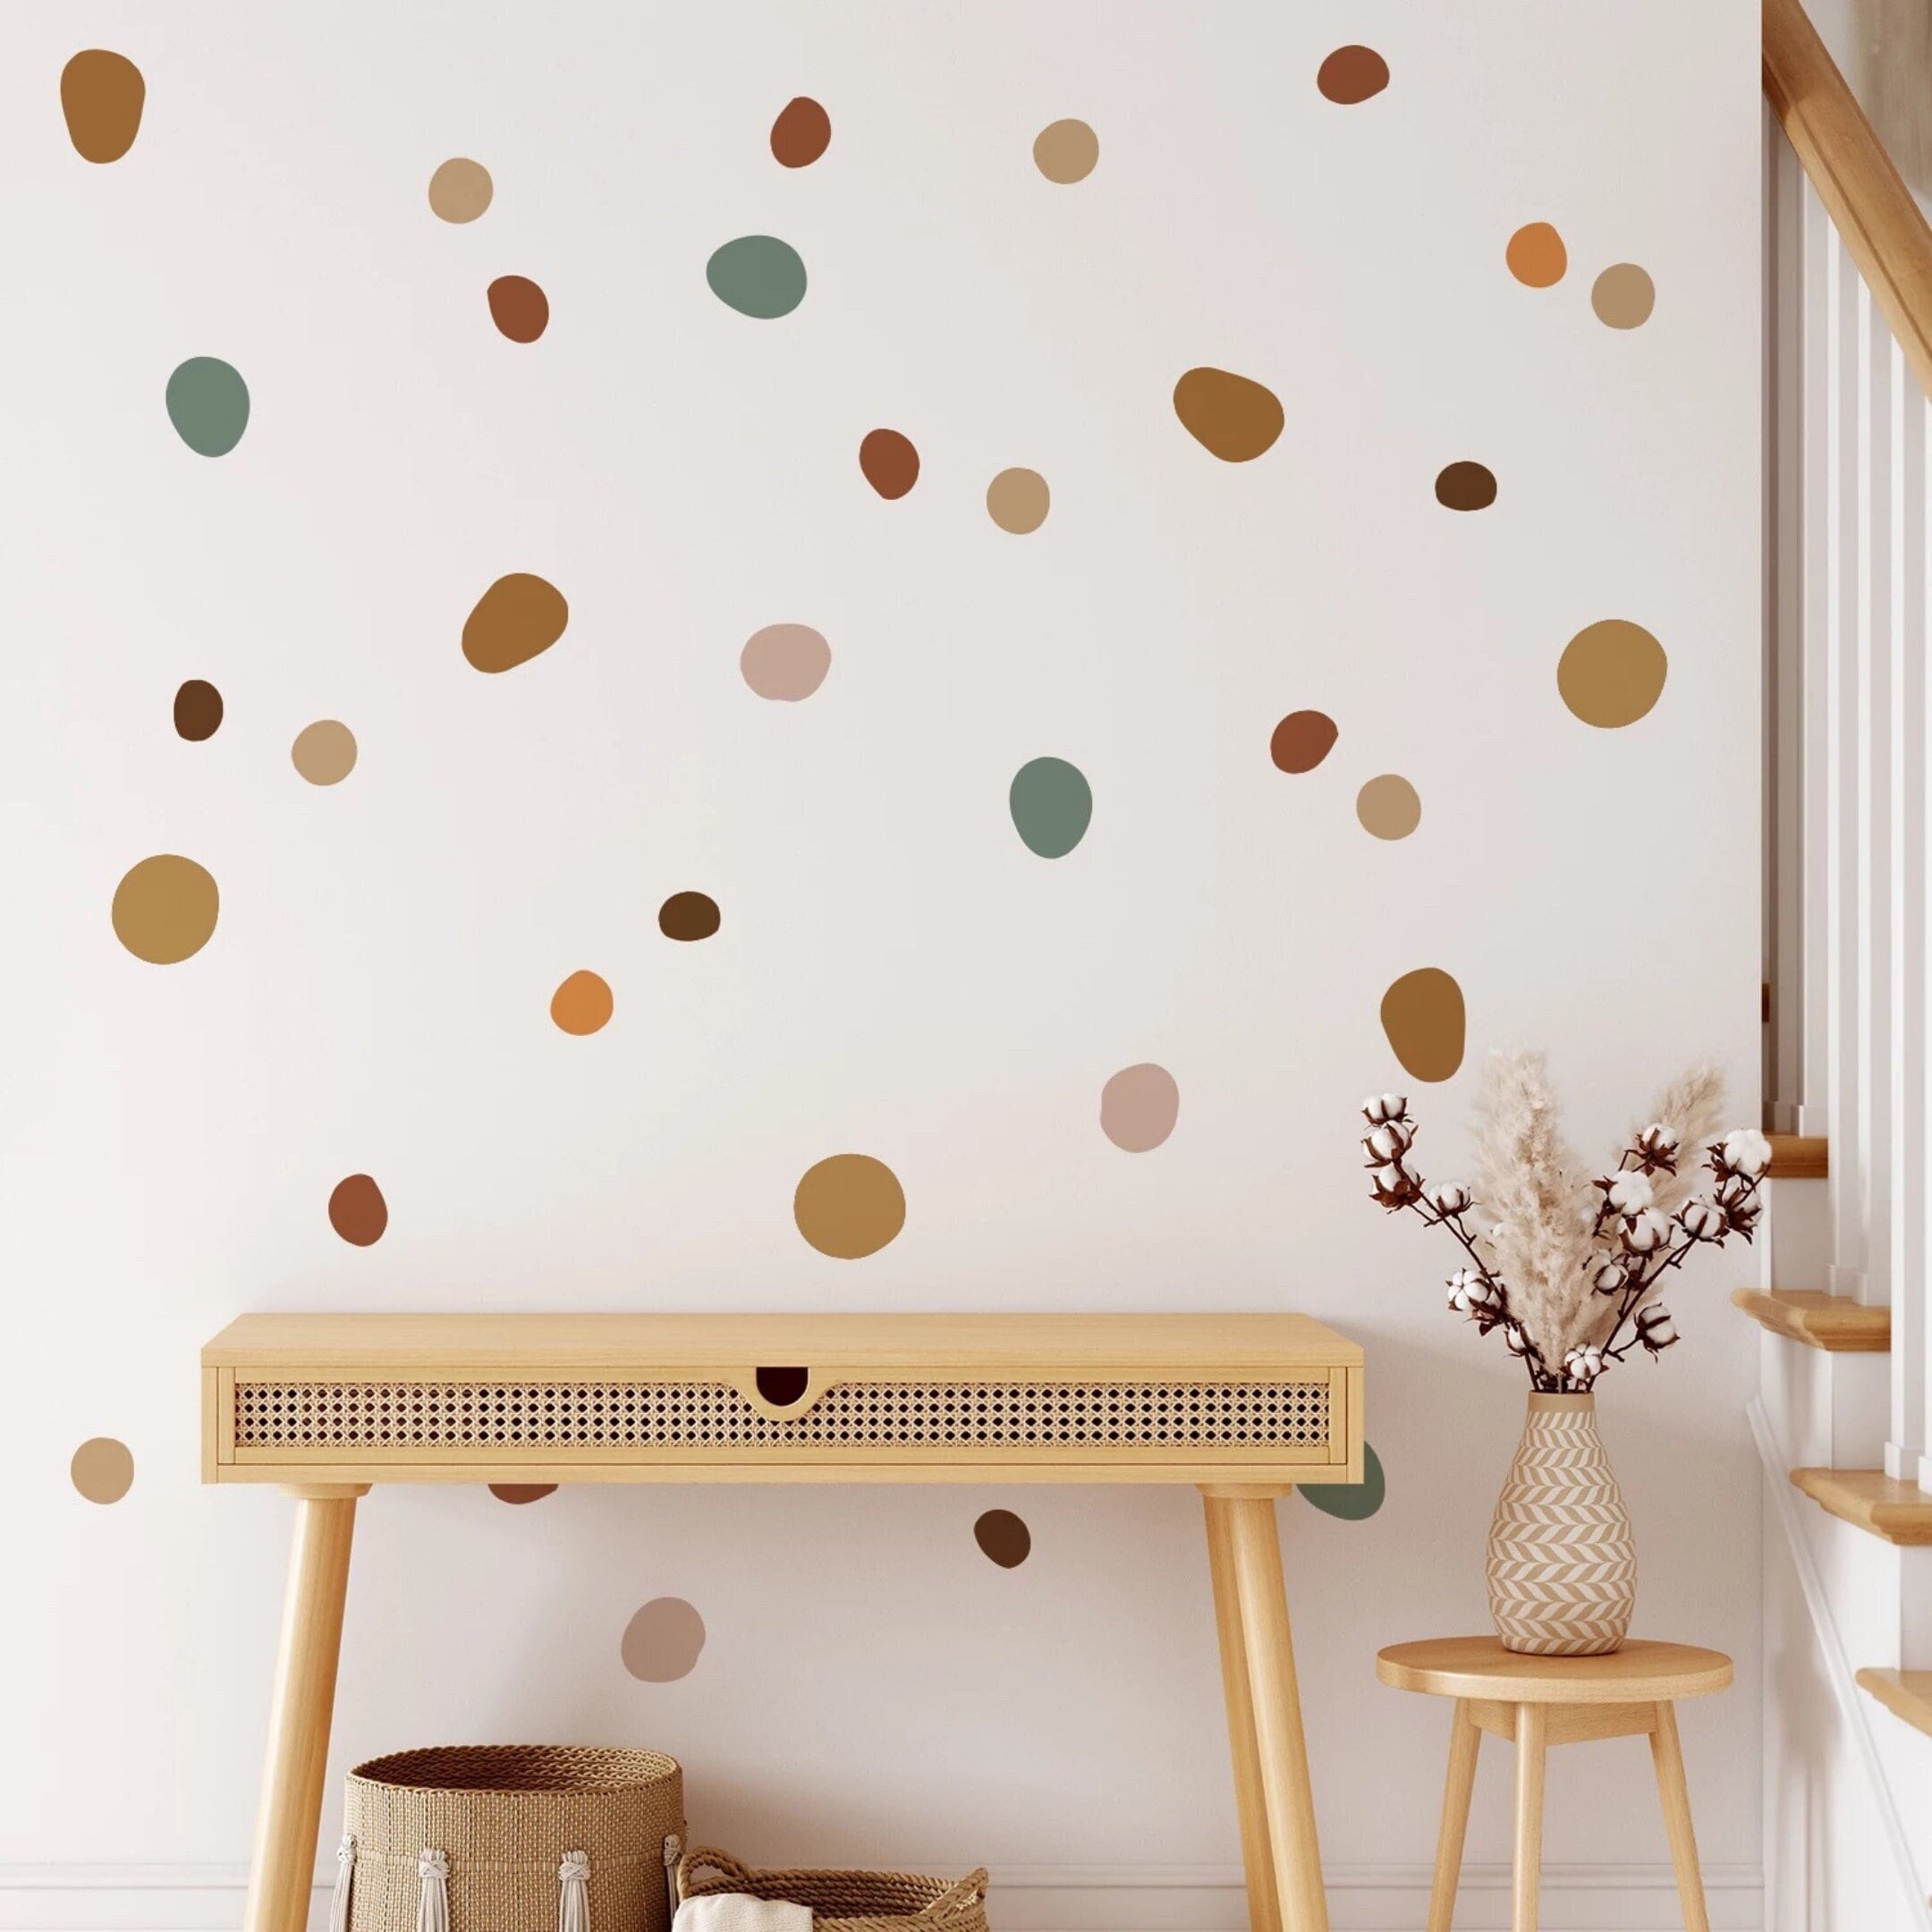 Booizzi Set of 120 Polka Dot Wall Stickers Decal Childs Kids Vinyl Art Decor spots Choice of 24 Colours Copper 